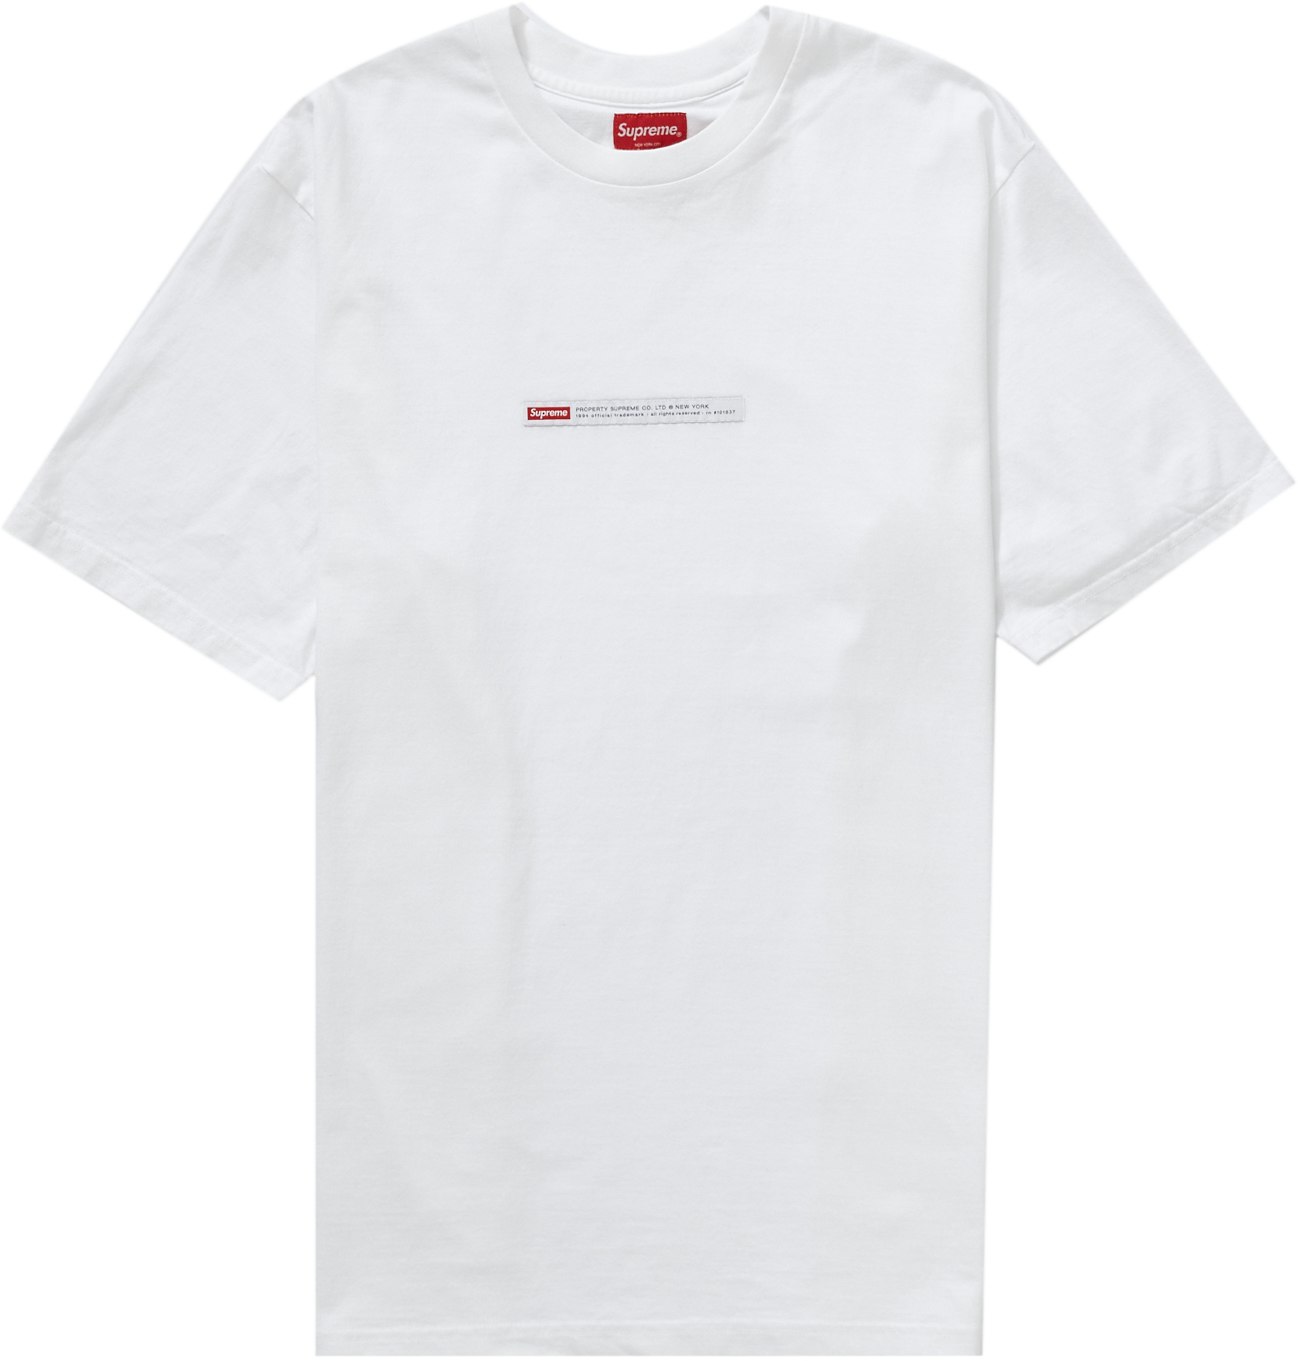 XL Supreme Property Label S/S Top Tシャツ - トップス